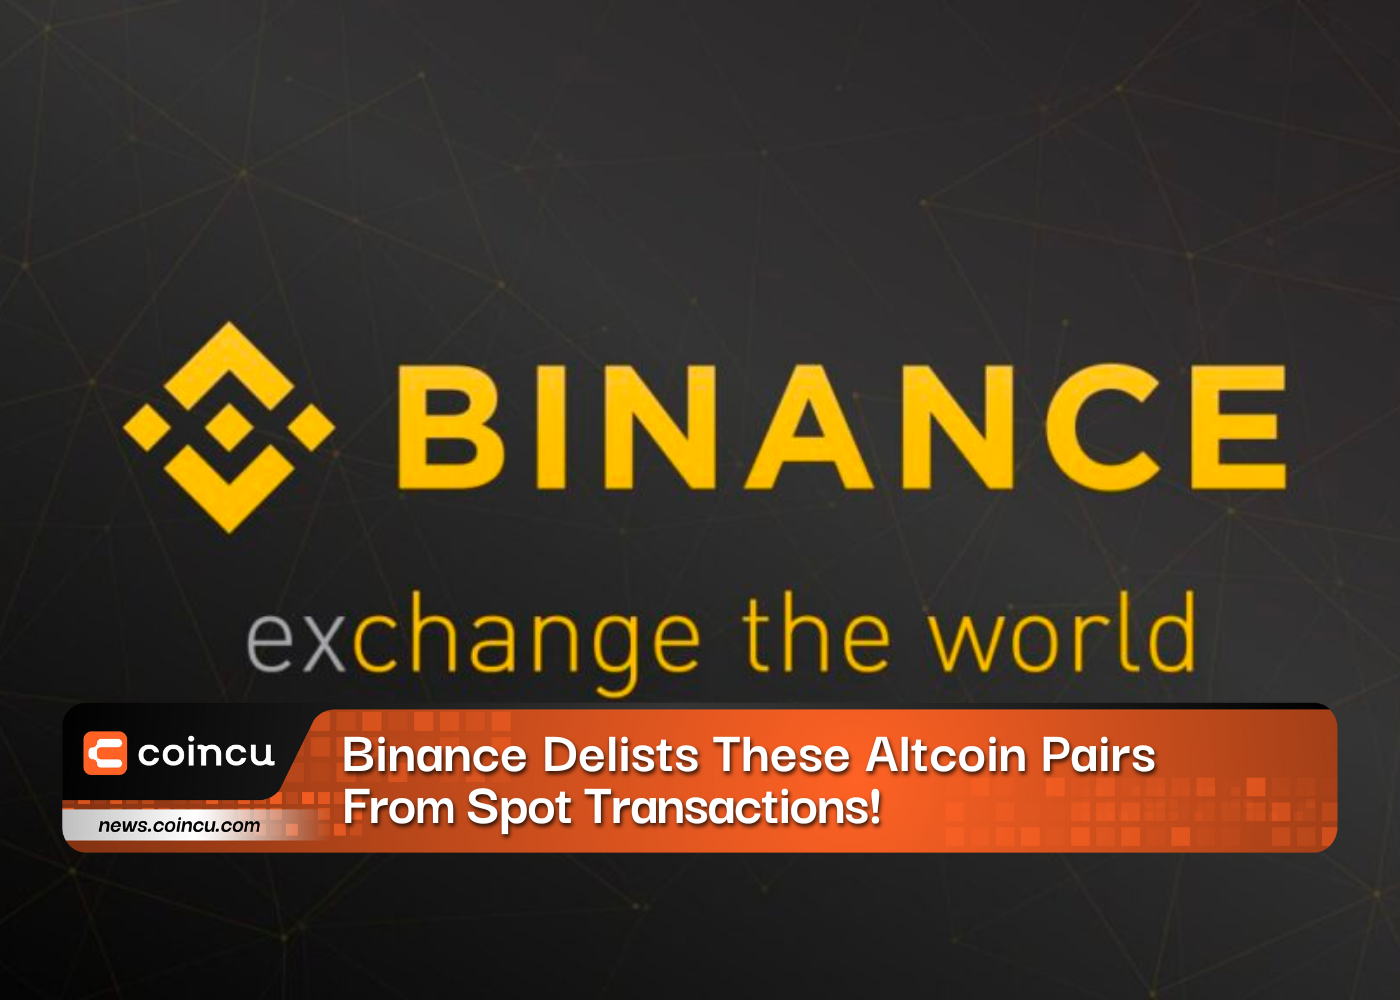 Binance Delists These Altcoin Pairs From Spot Transactions!